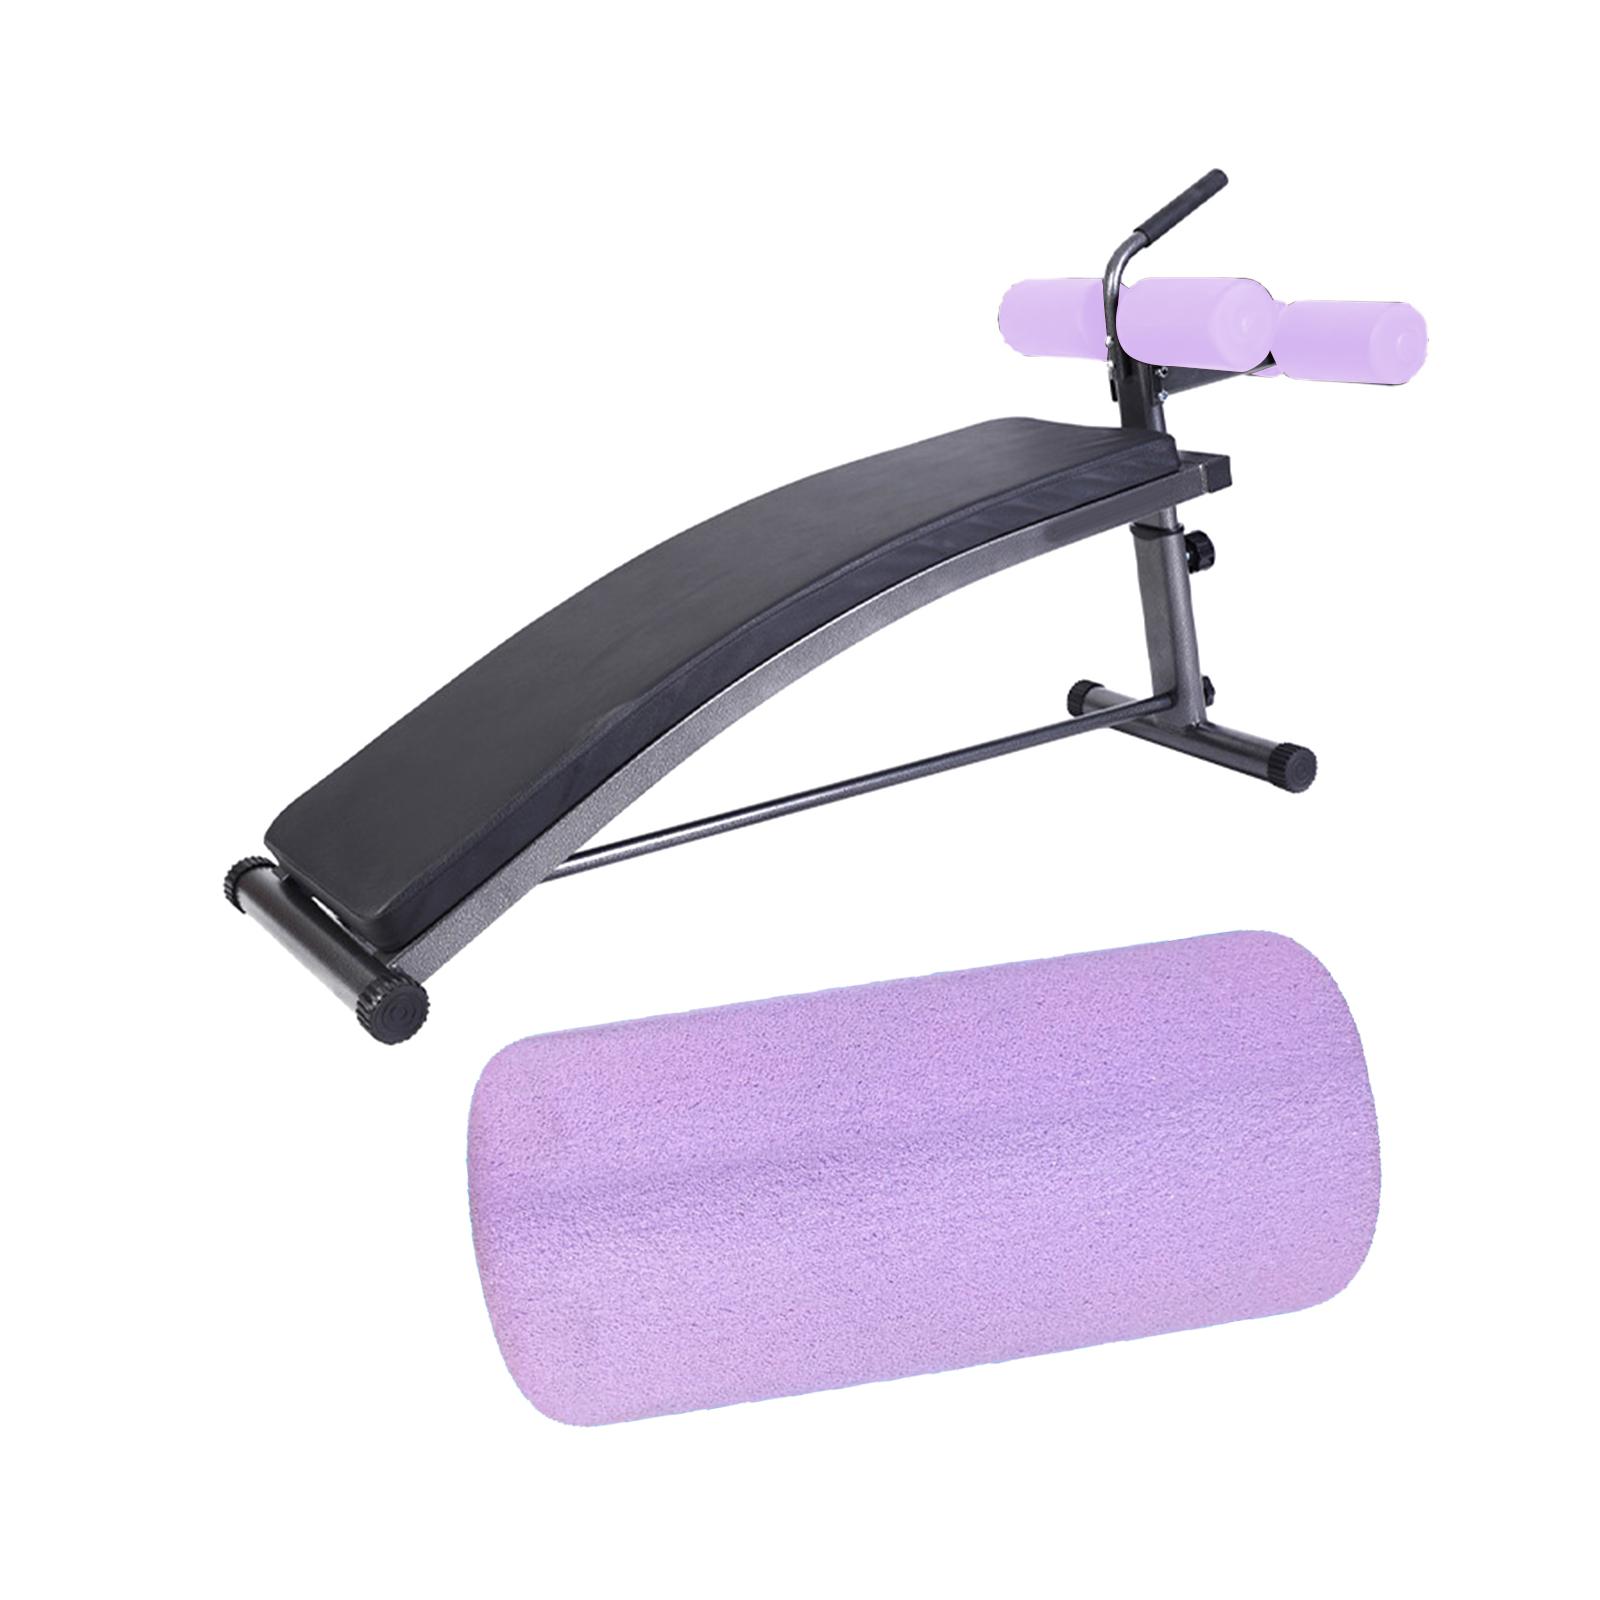 Foam Foot Pads Rollers for Weight Bench Abdominal Trainer Workout Machine Violet